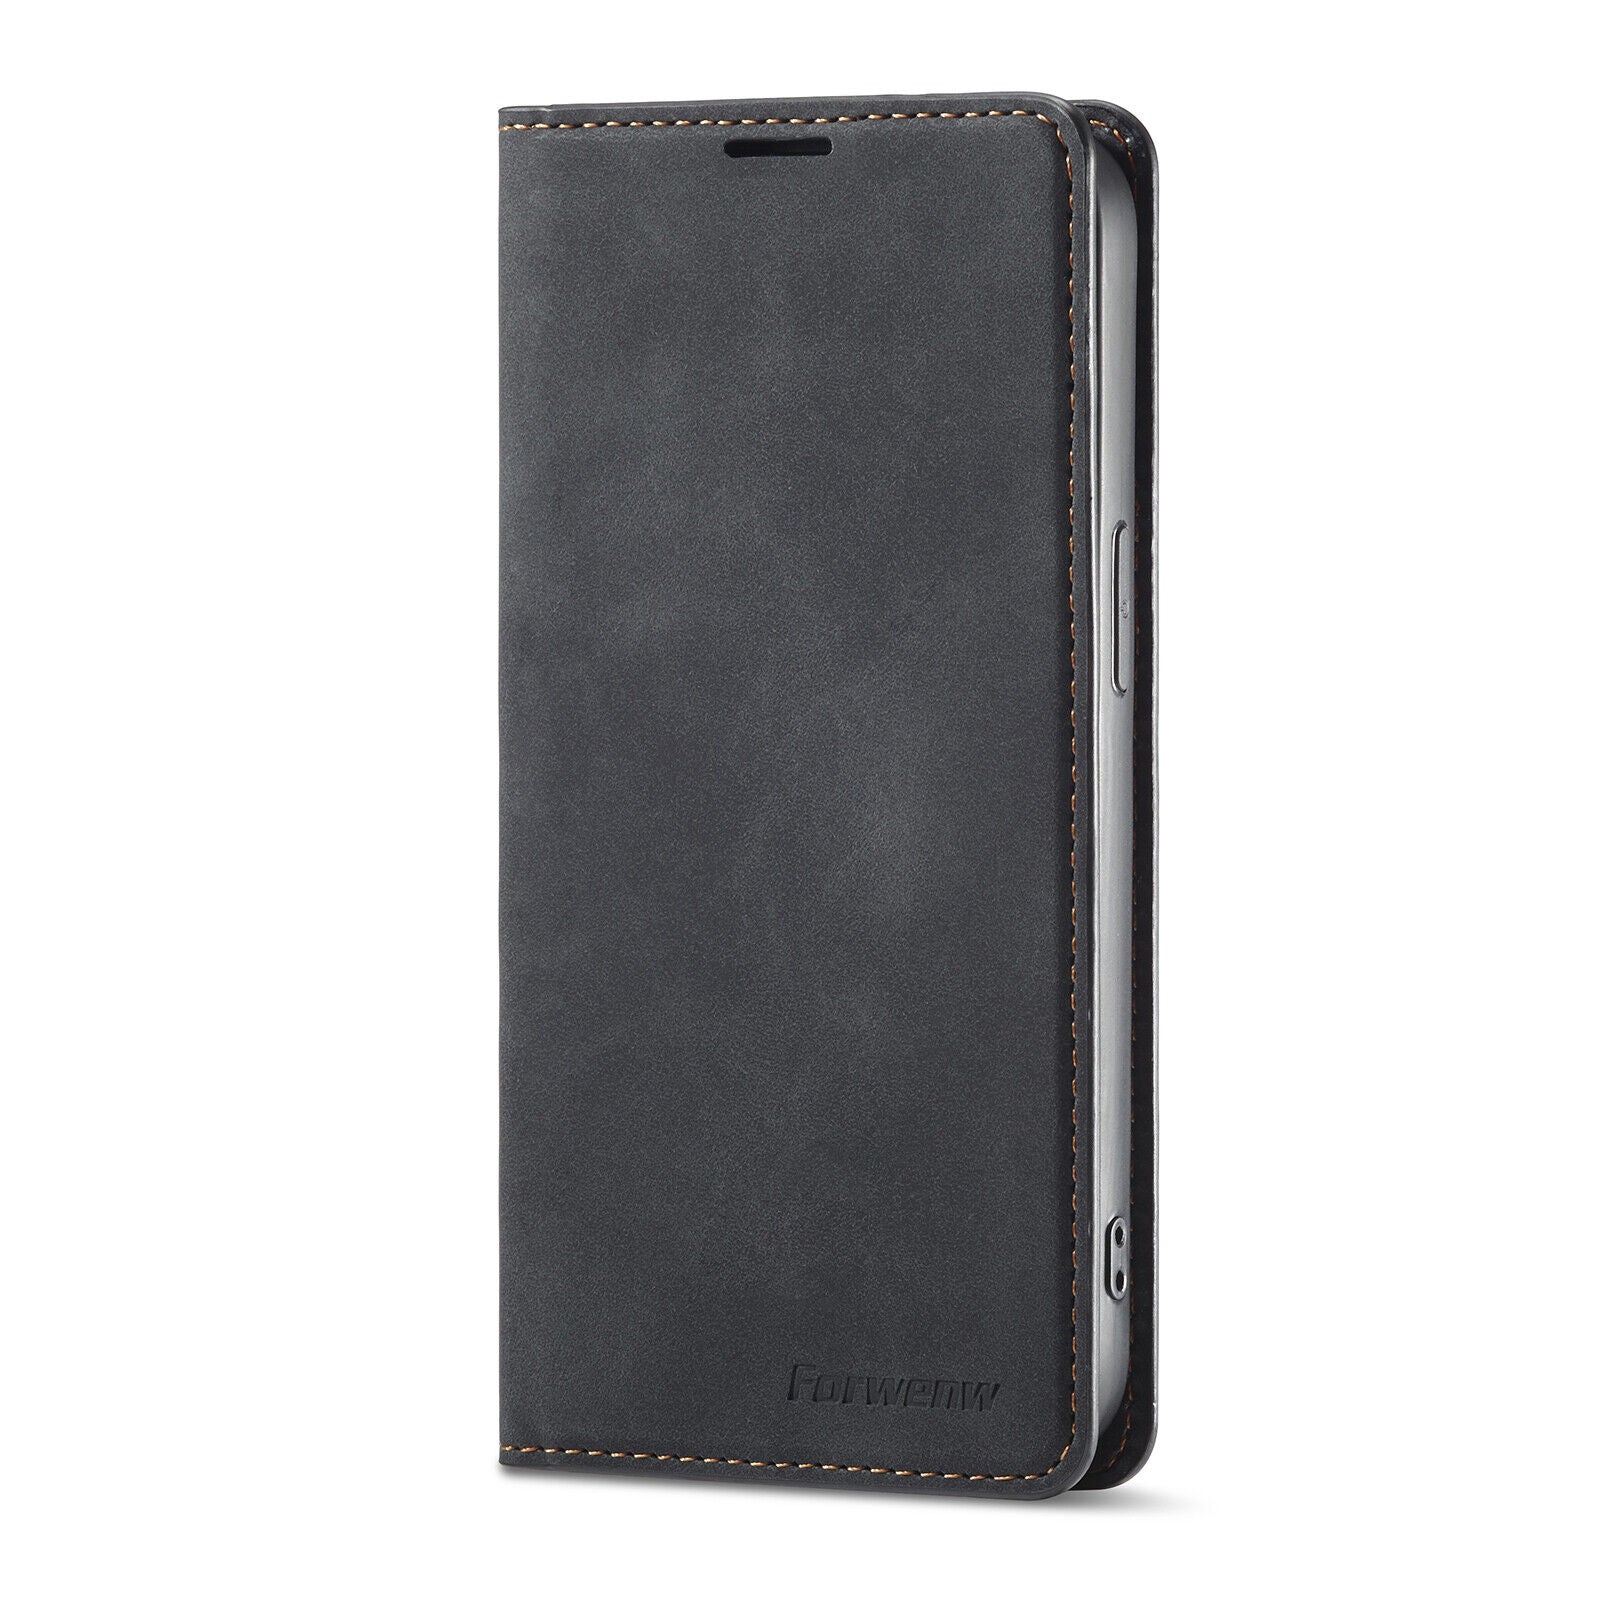 Everlab Wallet Leather Flip Case Cover Stand For iPhone